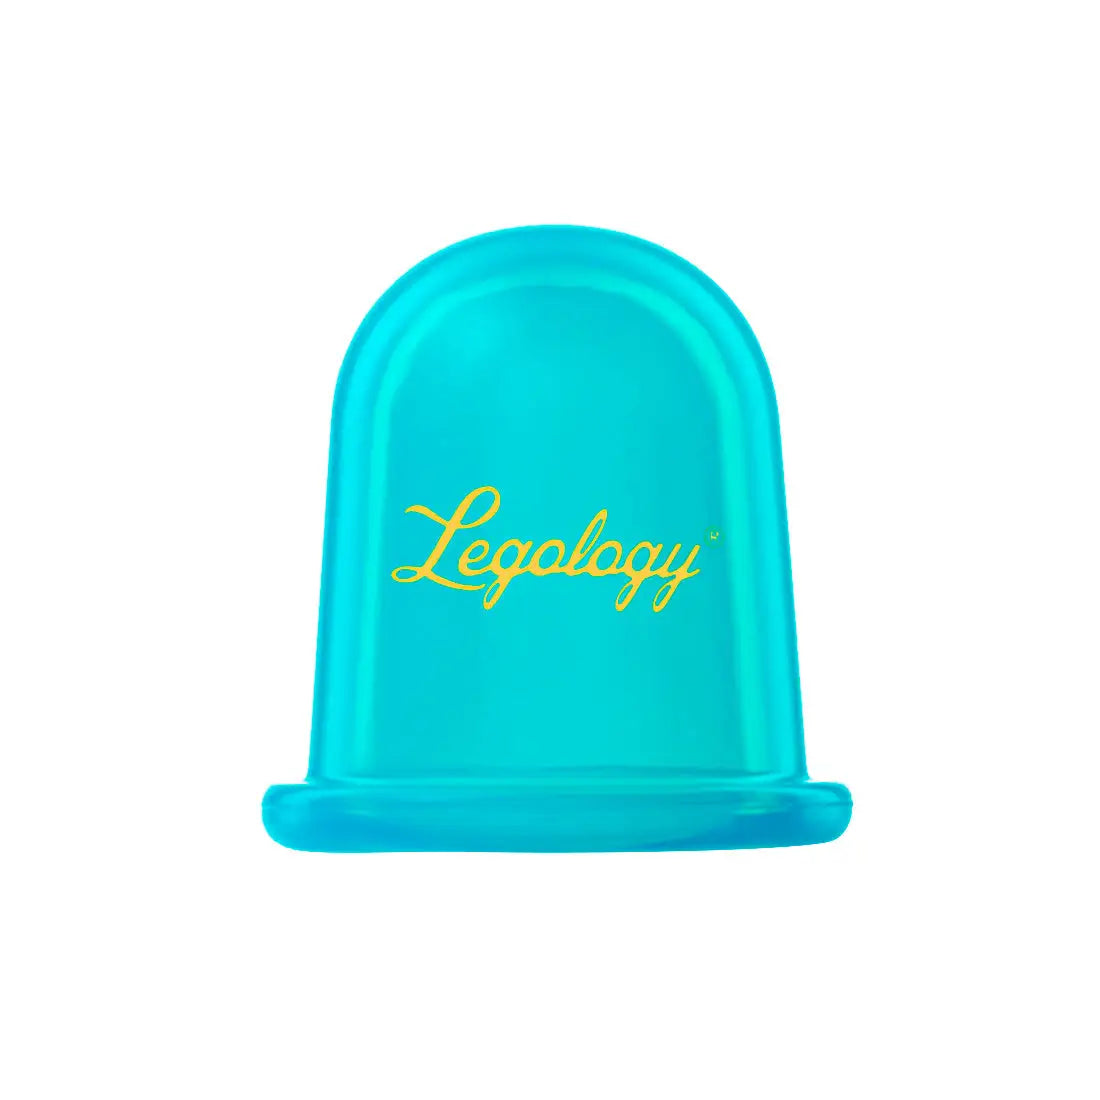 Legology Circu-Lite Squeeze Therapy For Legs